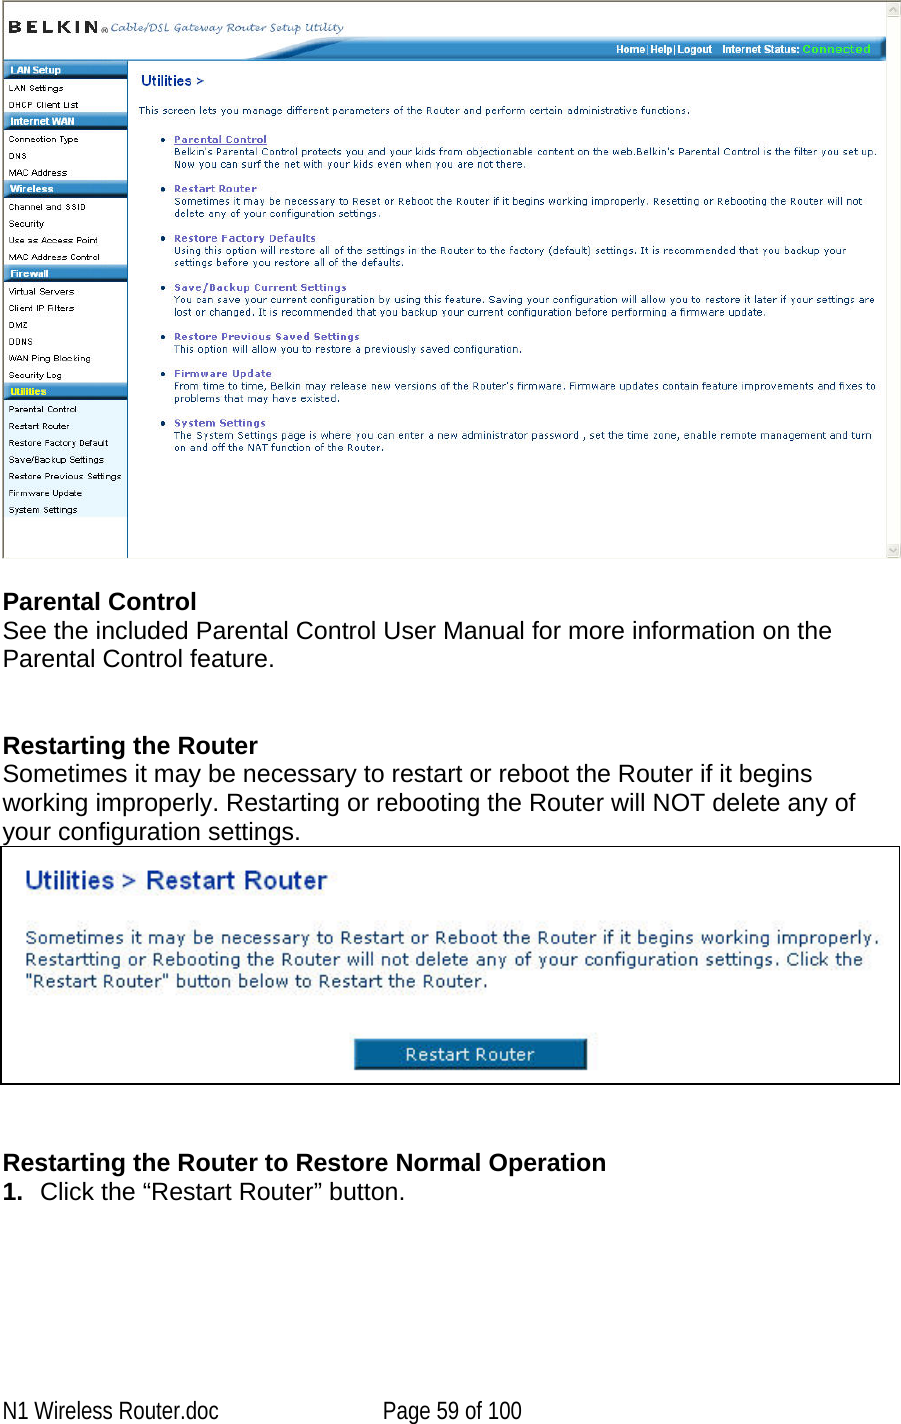       Parental Control See the included Parental Control User Manual for more information on the Parental Control feature.   Restarting the Router Sometimes it may be necessary to restart or reboot the Router if it begins working improperly. Restarting or rebooting the Router will NOT delete any of your configuration settings.    Restarting the Router to Restore Normal Operation 1.  Click the “Restart Router” button. N1 Wireless Router.doc  Page 59 of 100 